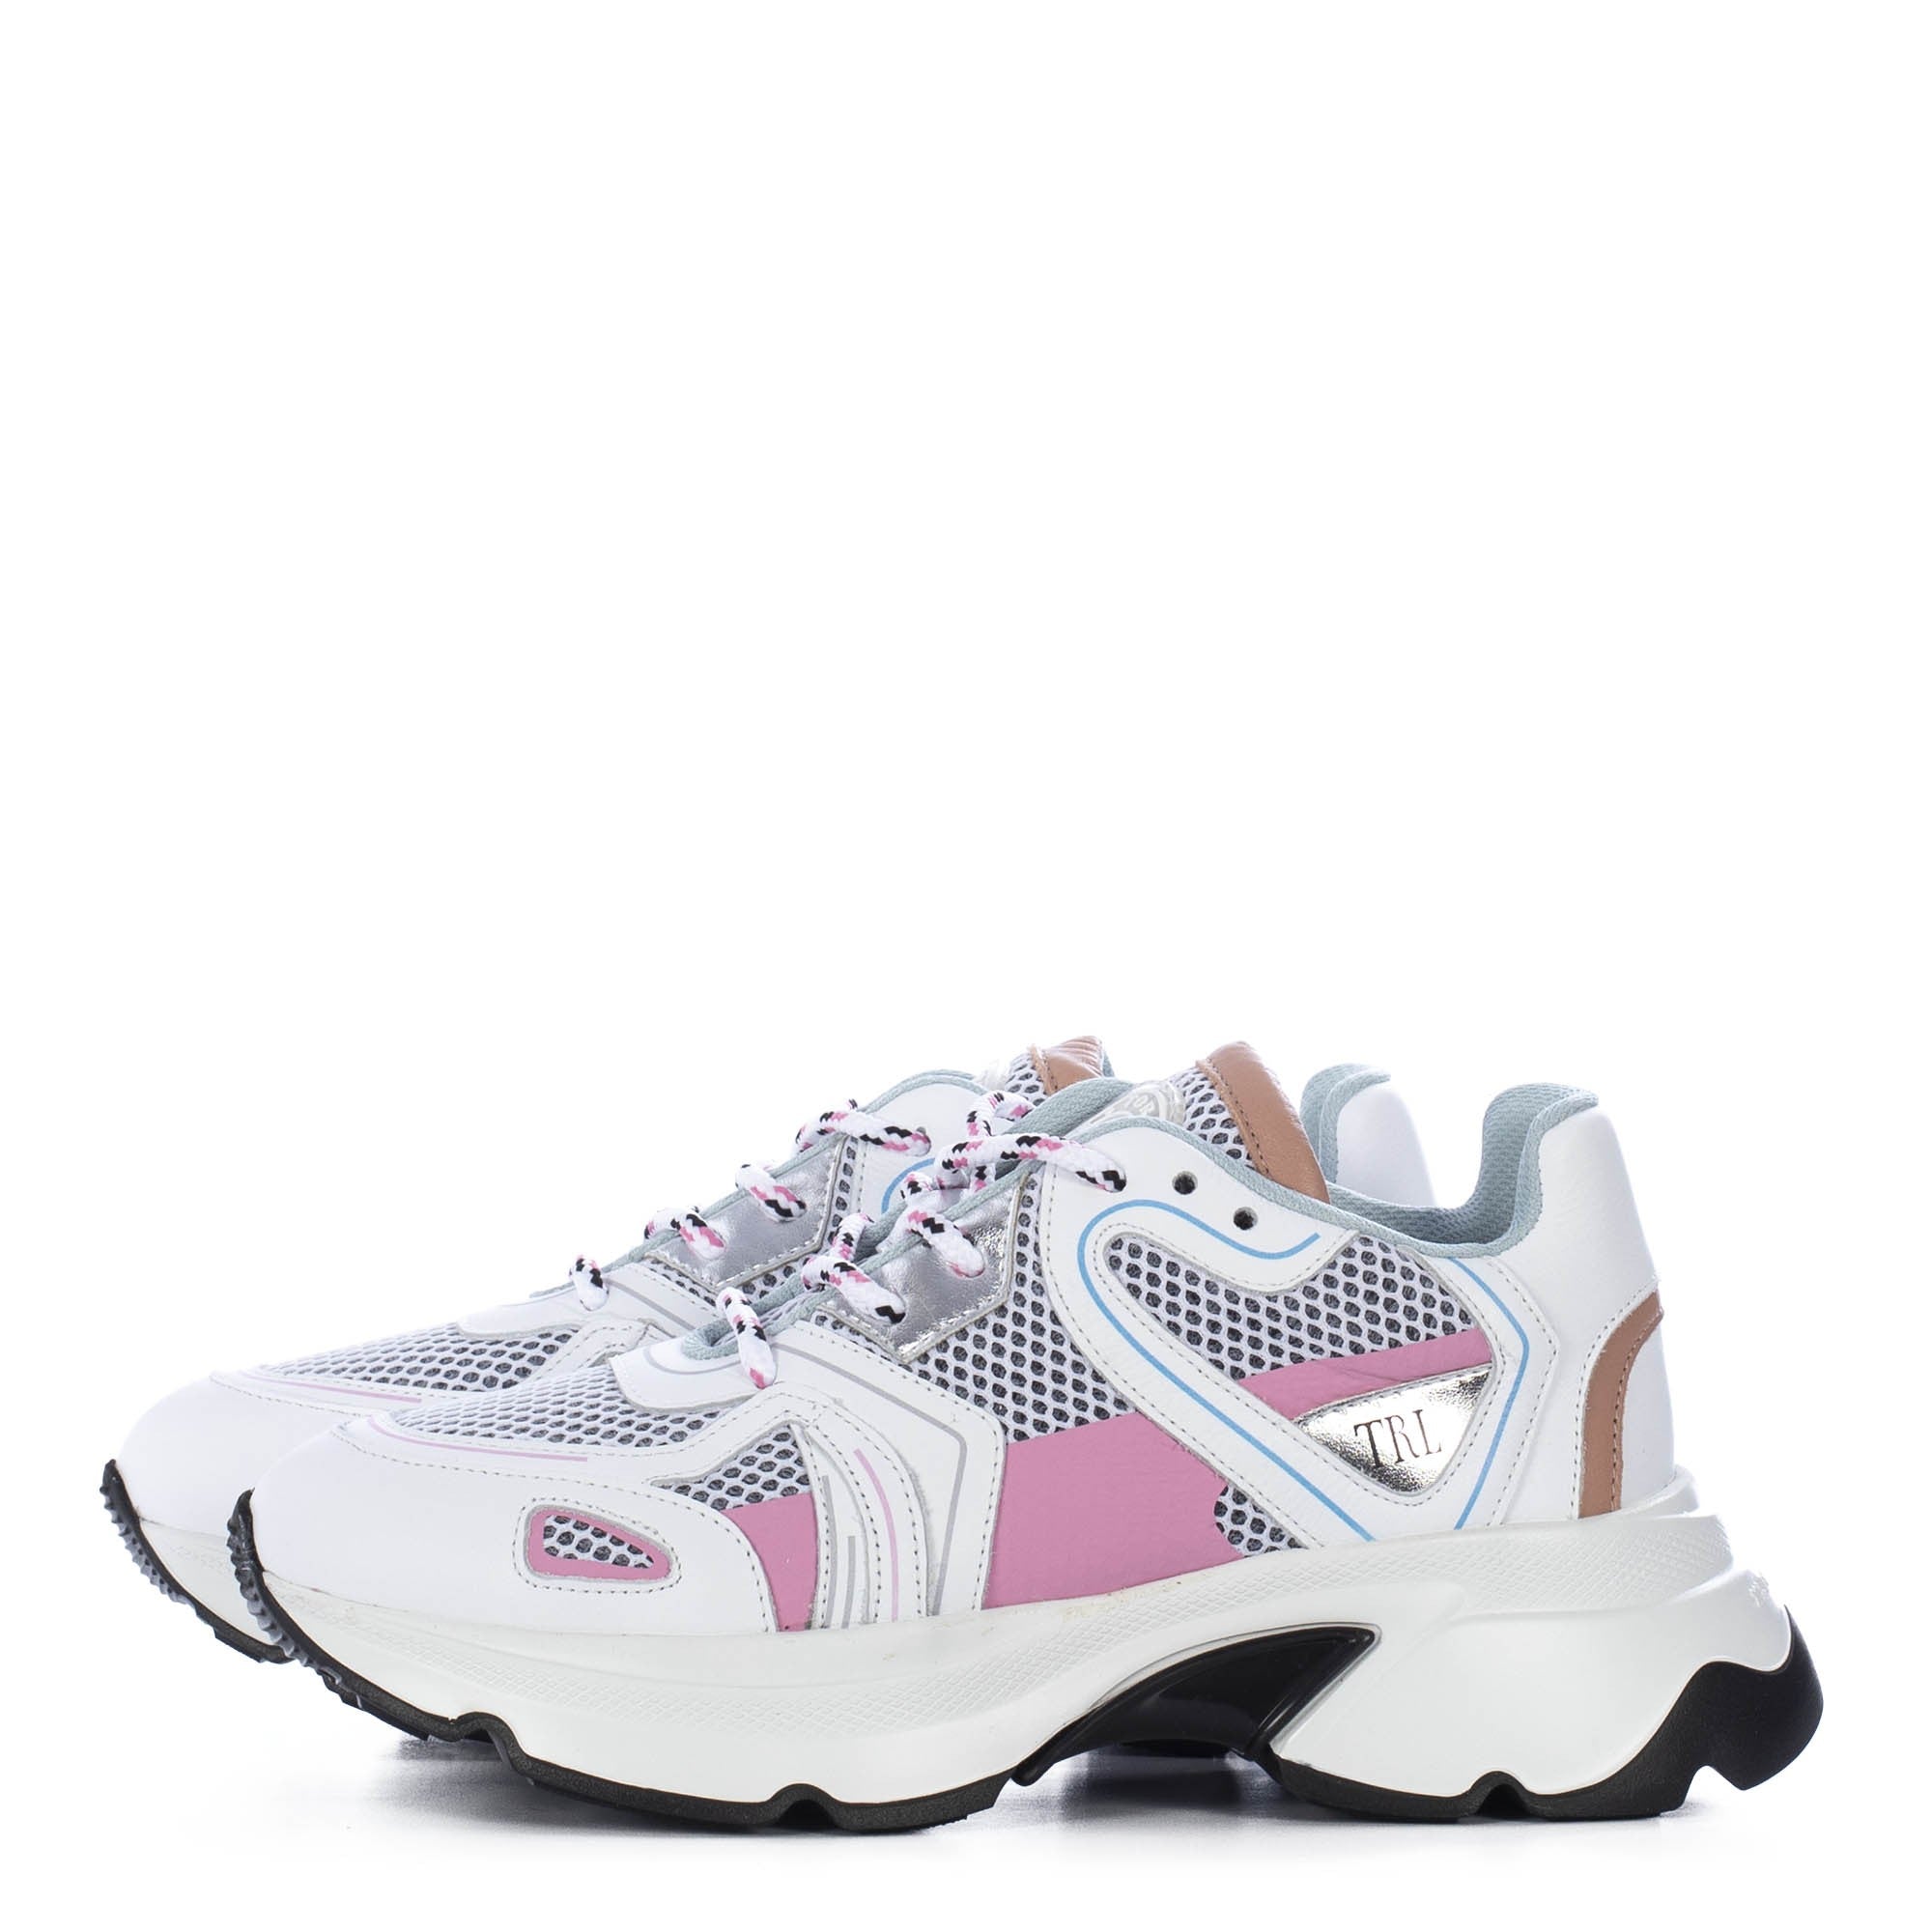 TORAL RUNNER 9 WHITE AND PINK SNEAKERS (6942835966092)